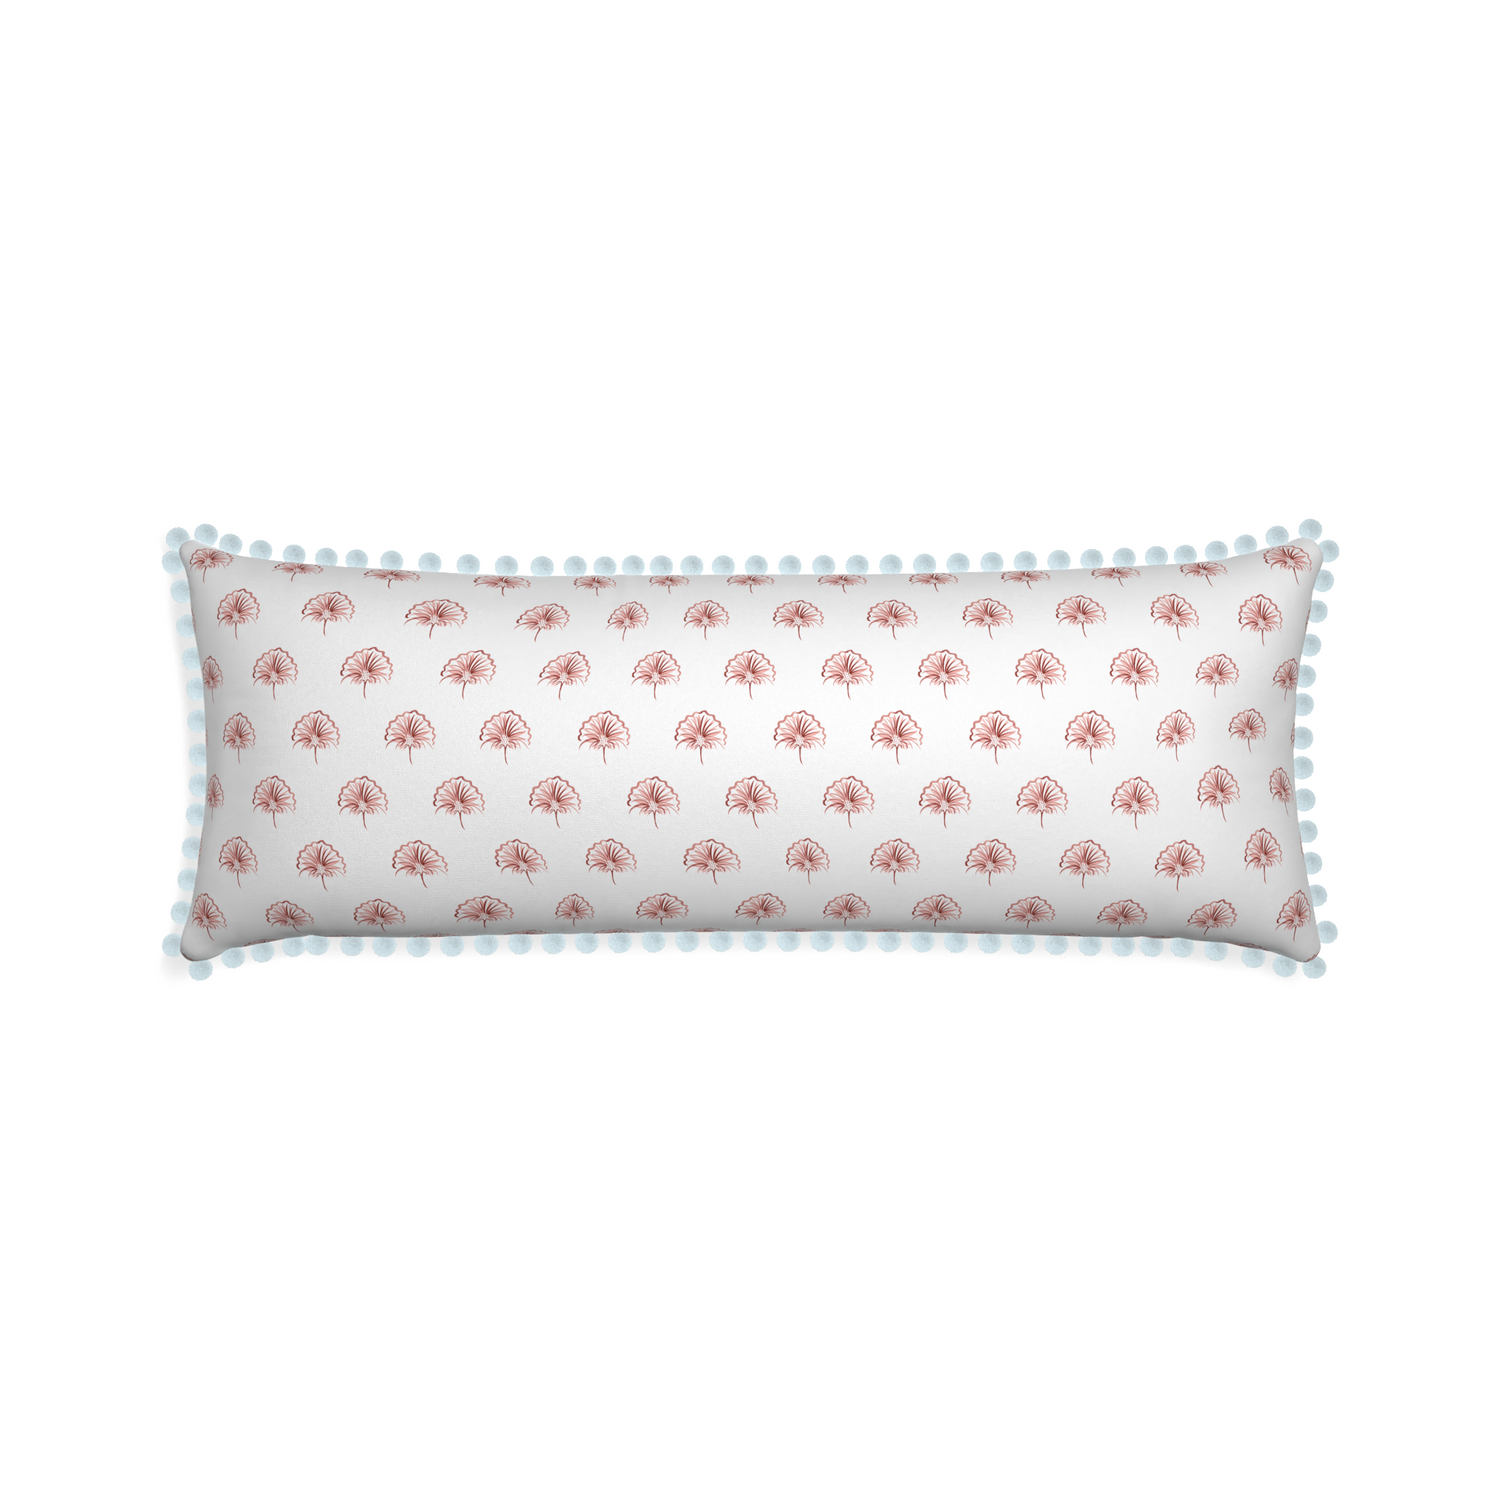 Xl-lumbar penelope rose custom floral pinkpillow with powder pom pom on white background